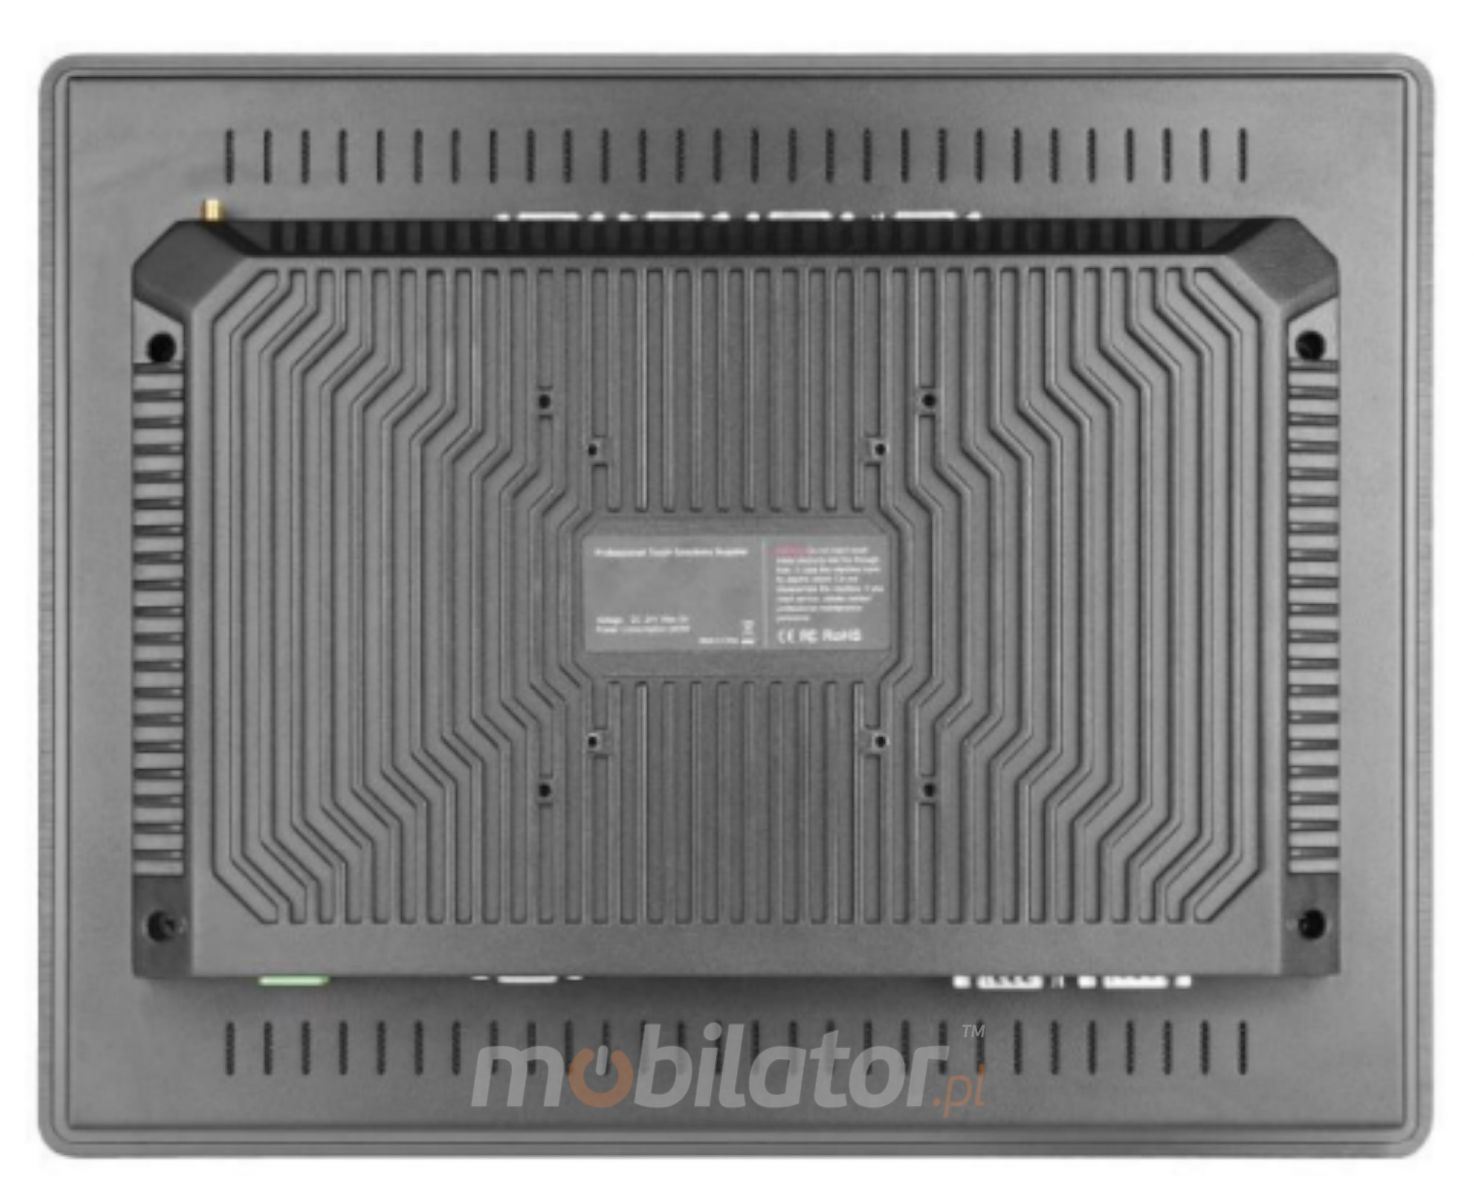 BIBOX-190PC2 resistant and robust, thanks to metal housing